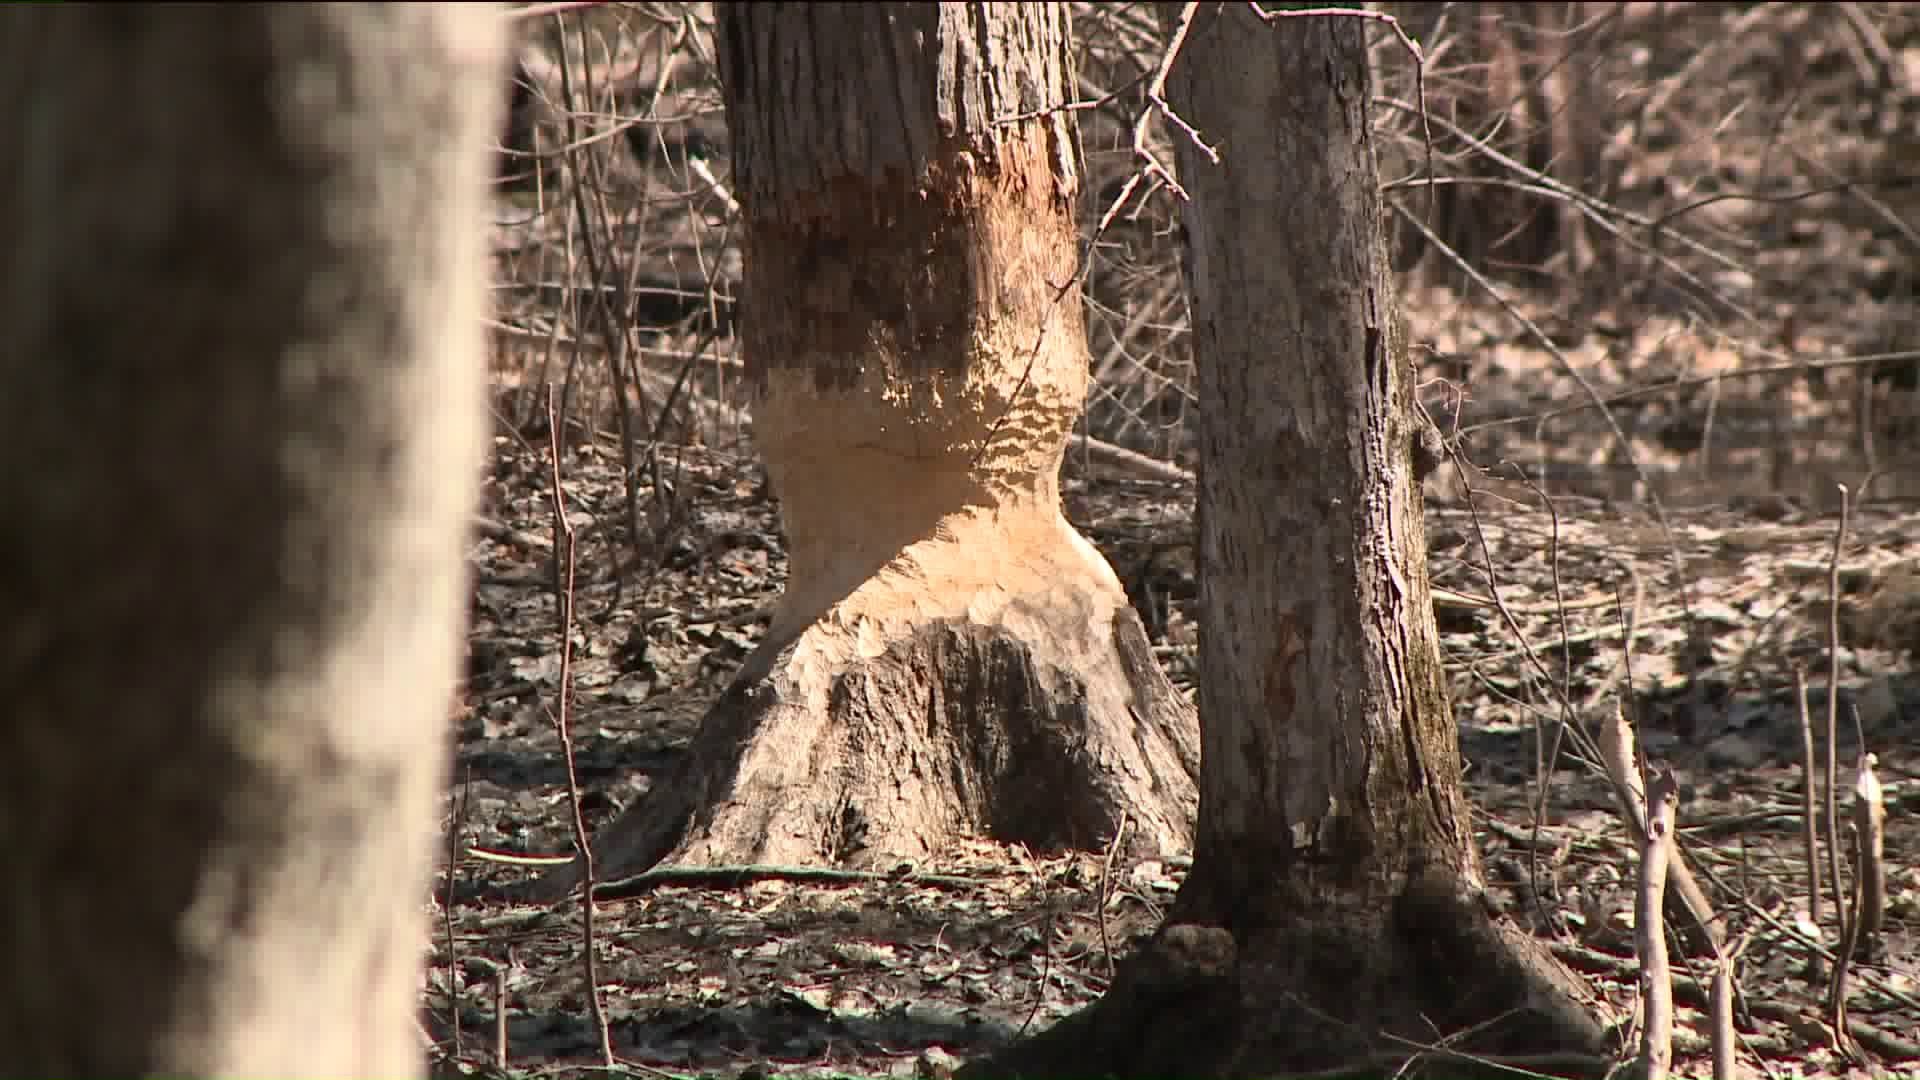 South Windsor Outraged after beavers are killed